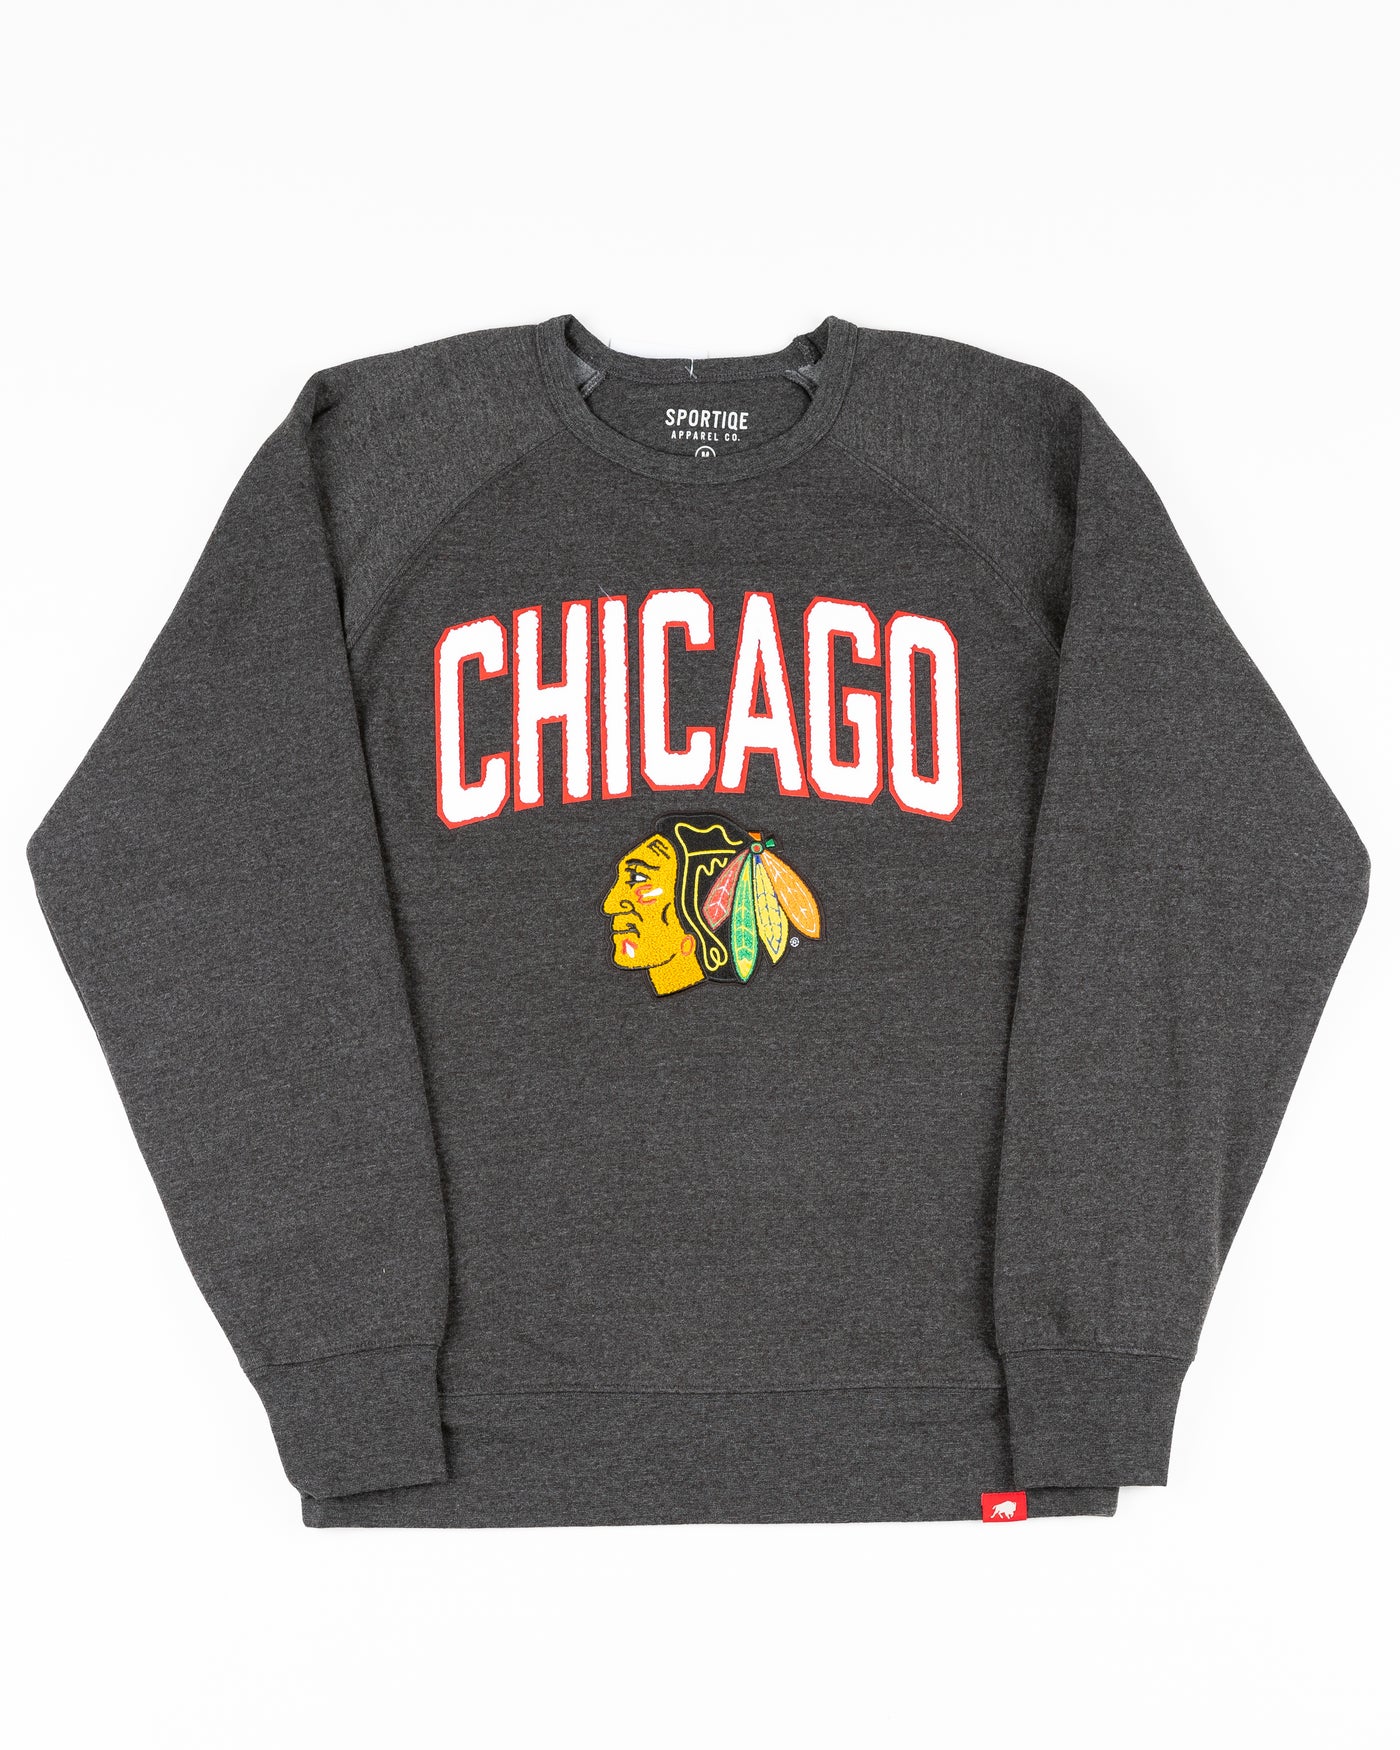 black Sportiqe crewneck with Chicago Blackhawks primary logo and Chicago wordmark embroidered in chenille - front lay flat